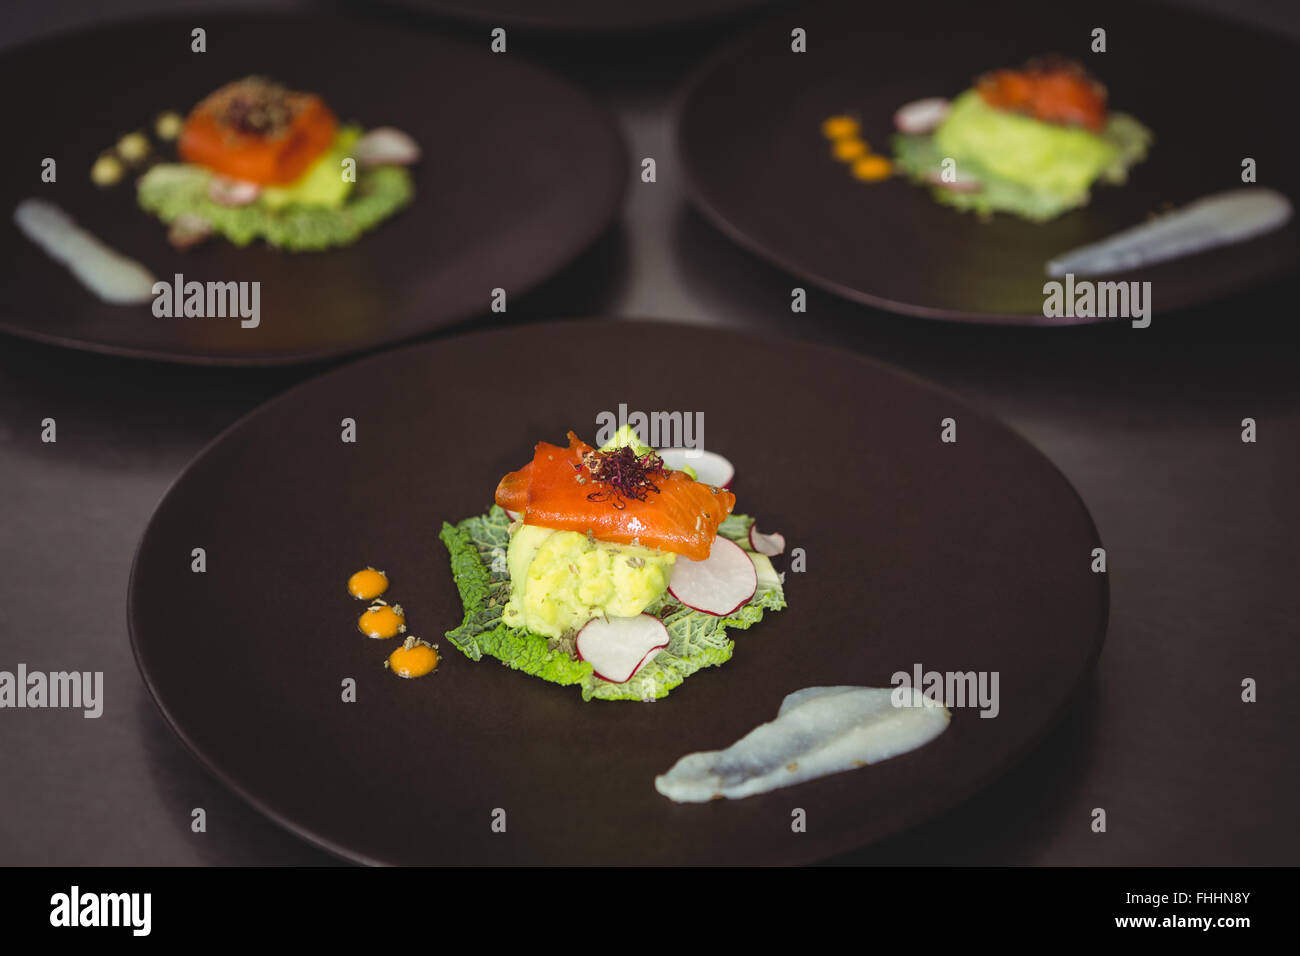 Plates of main course on counter Stock Photo